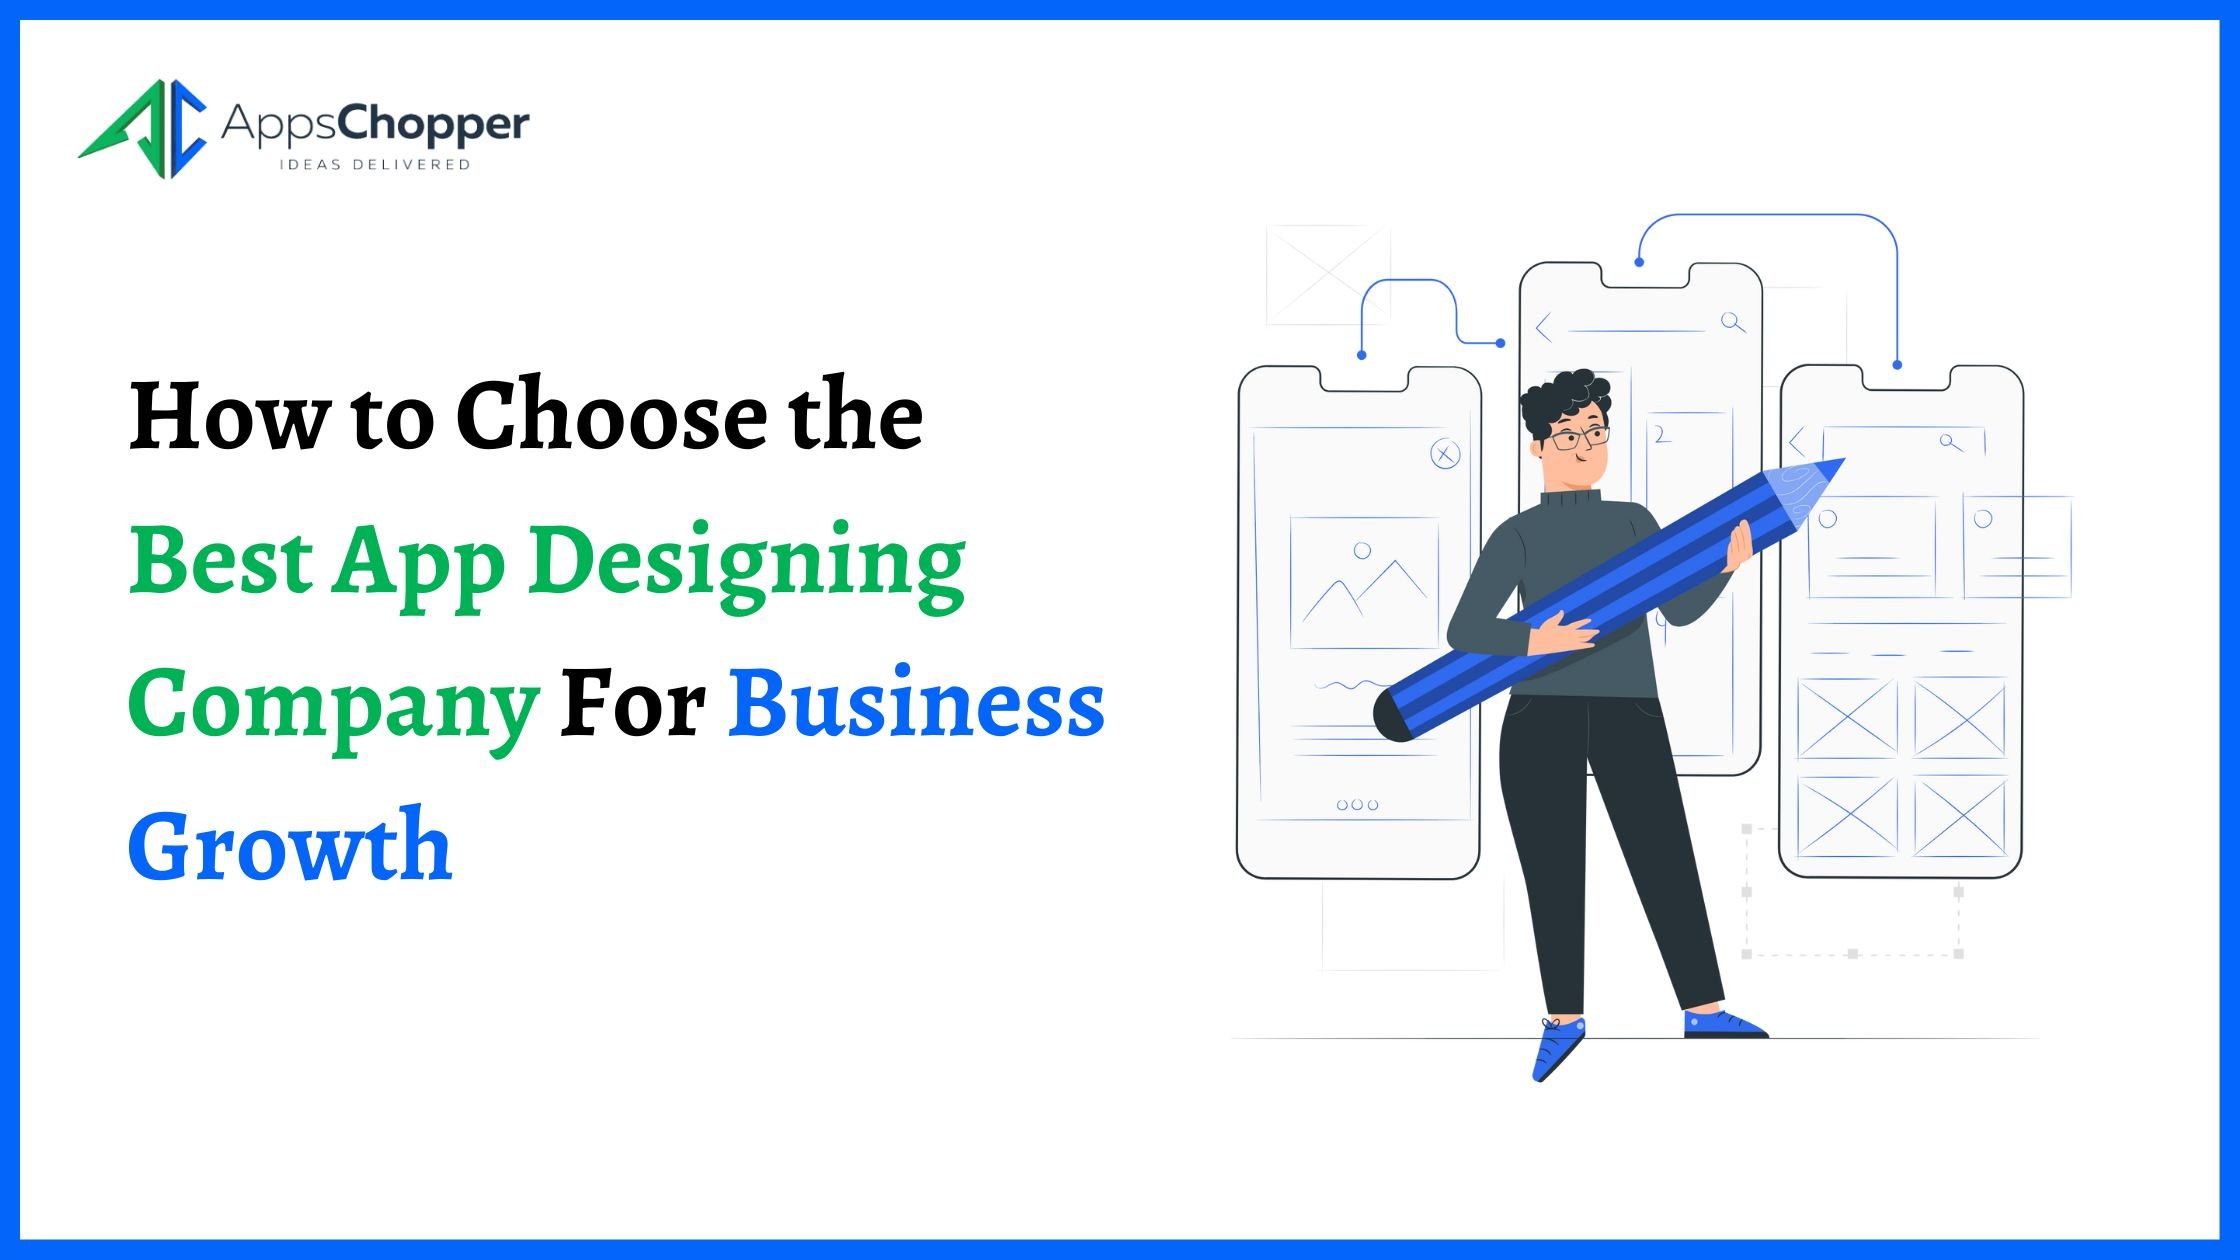 How to Choose the Best App Designing Company For Business Growth